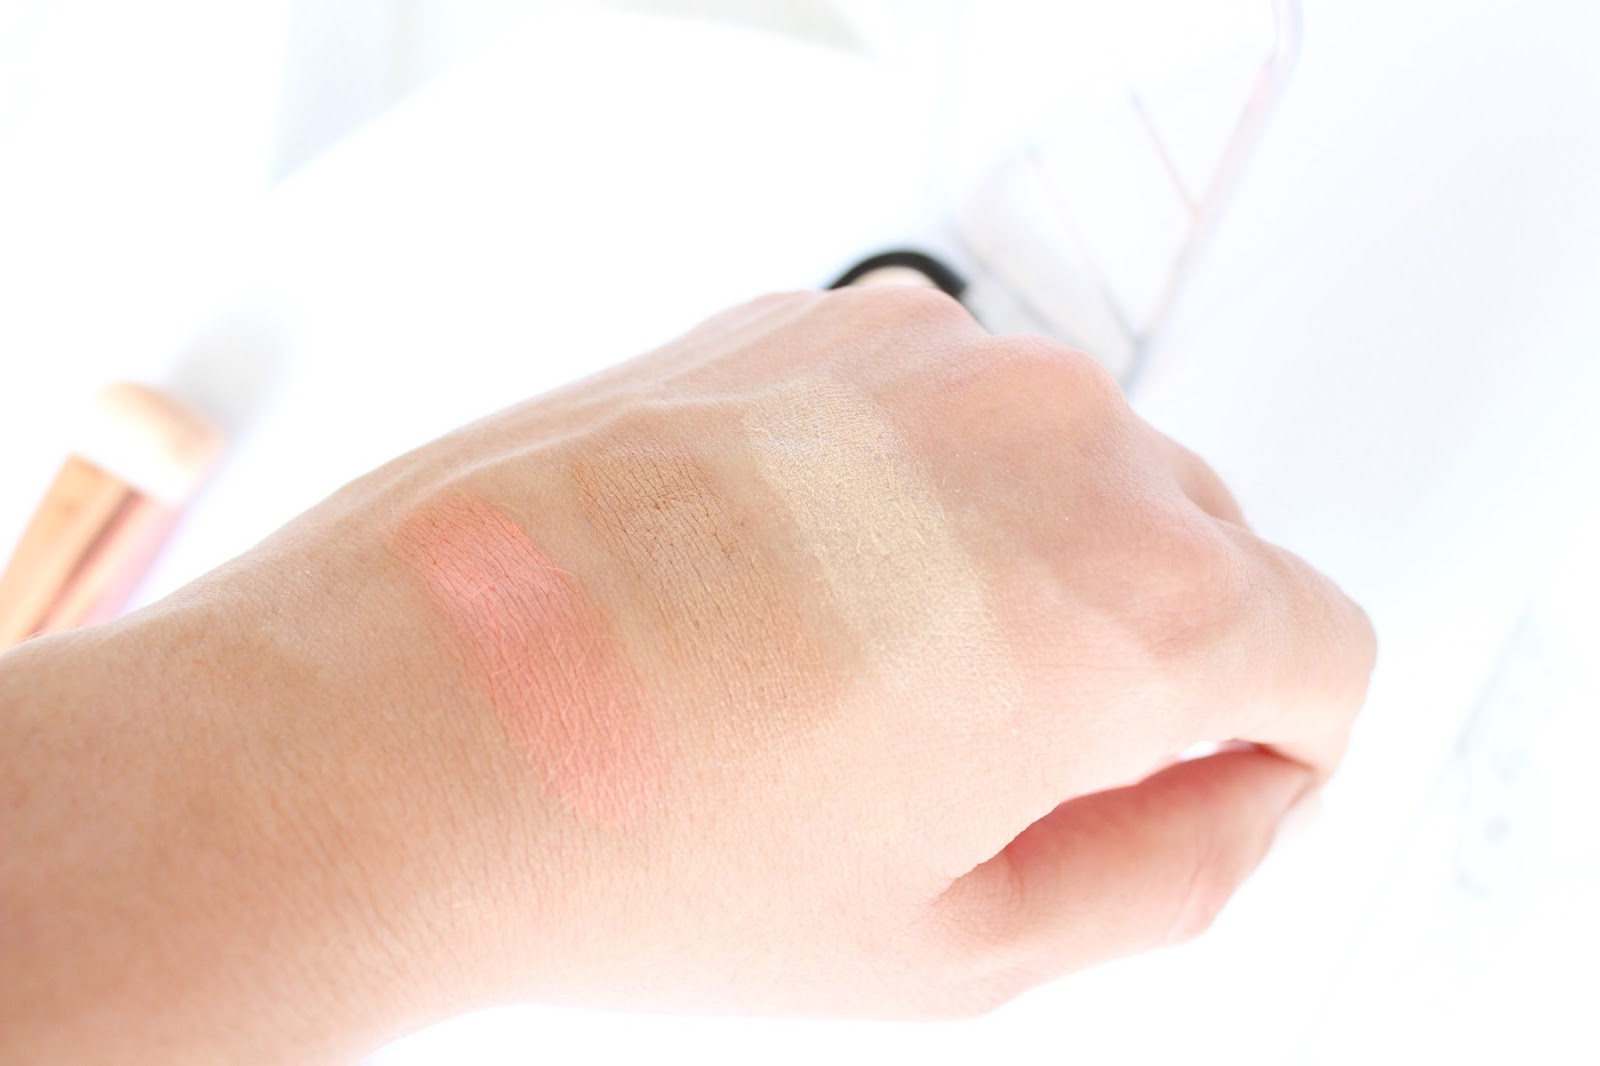 Swatches of Rimmel Kate Moss Sculpting & Highlighting Kit in 002 Coral Glow